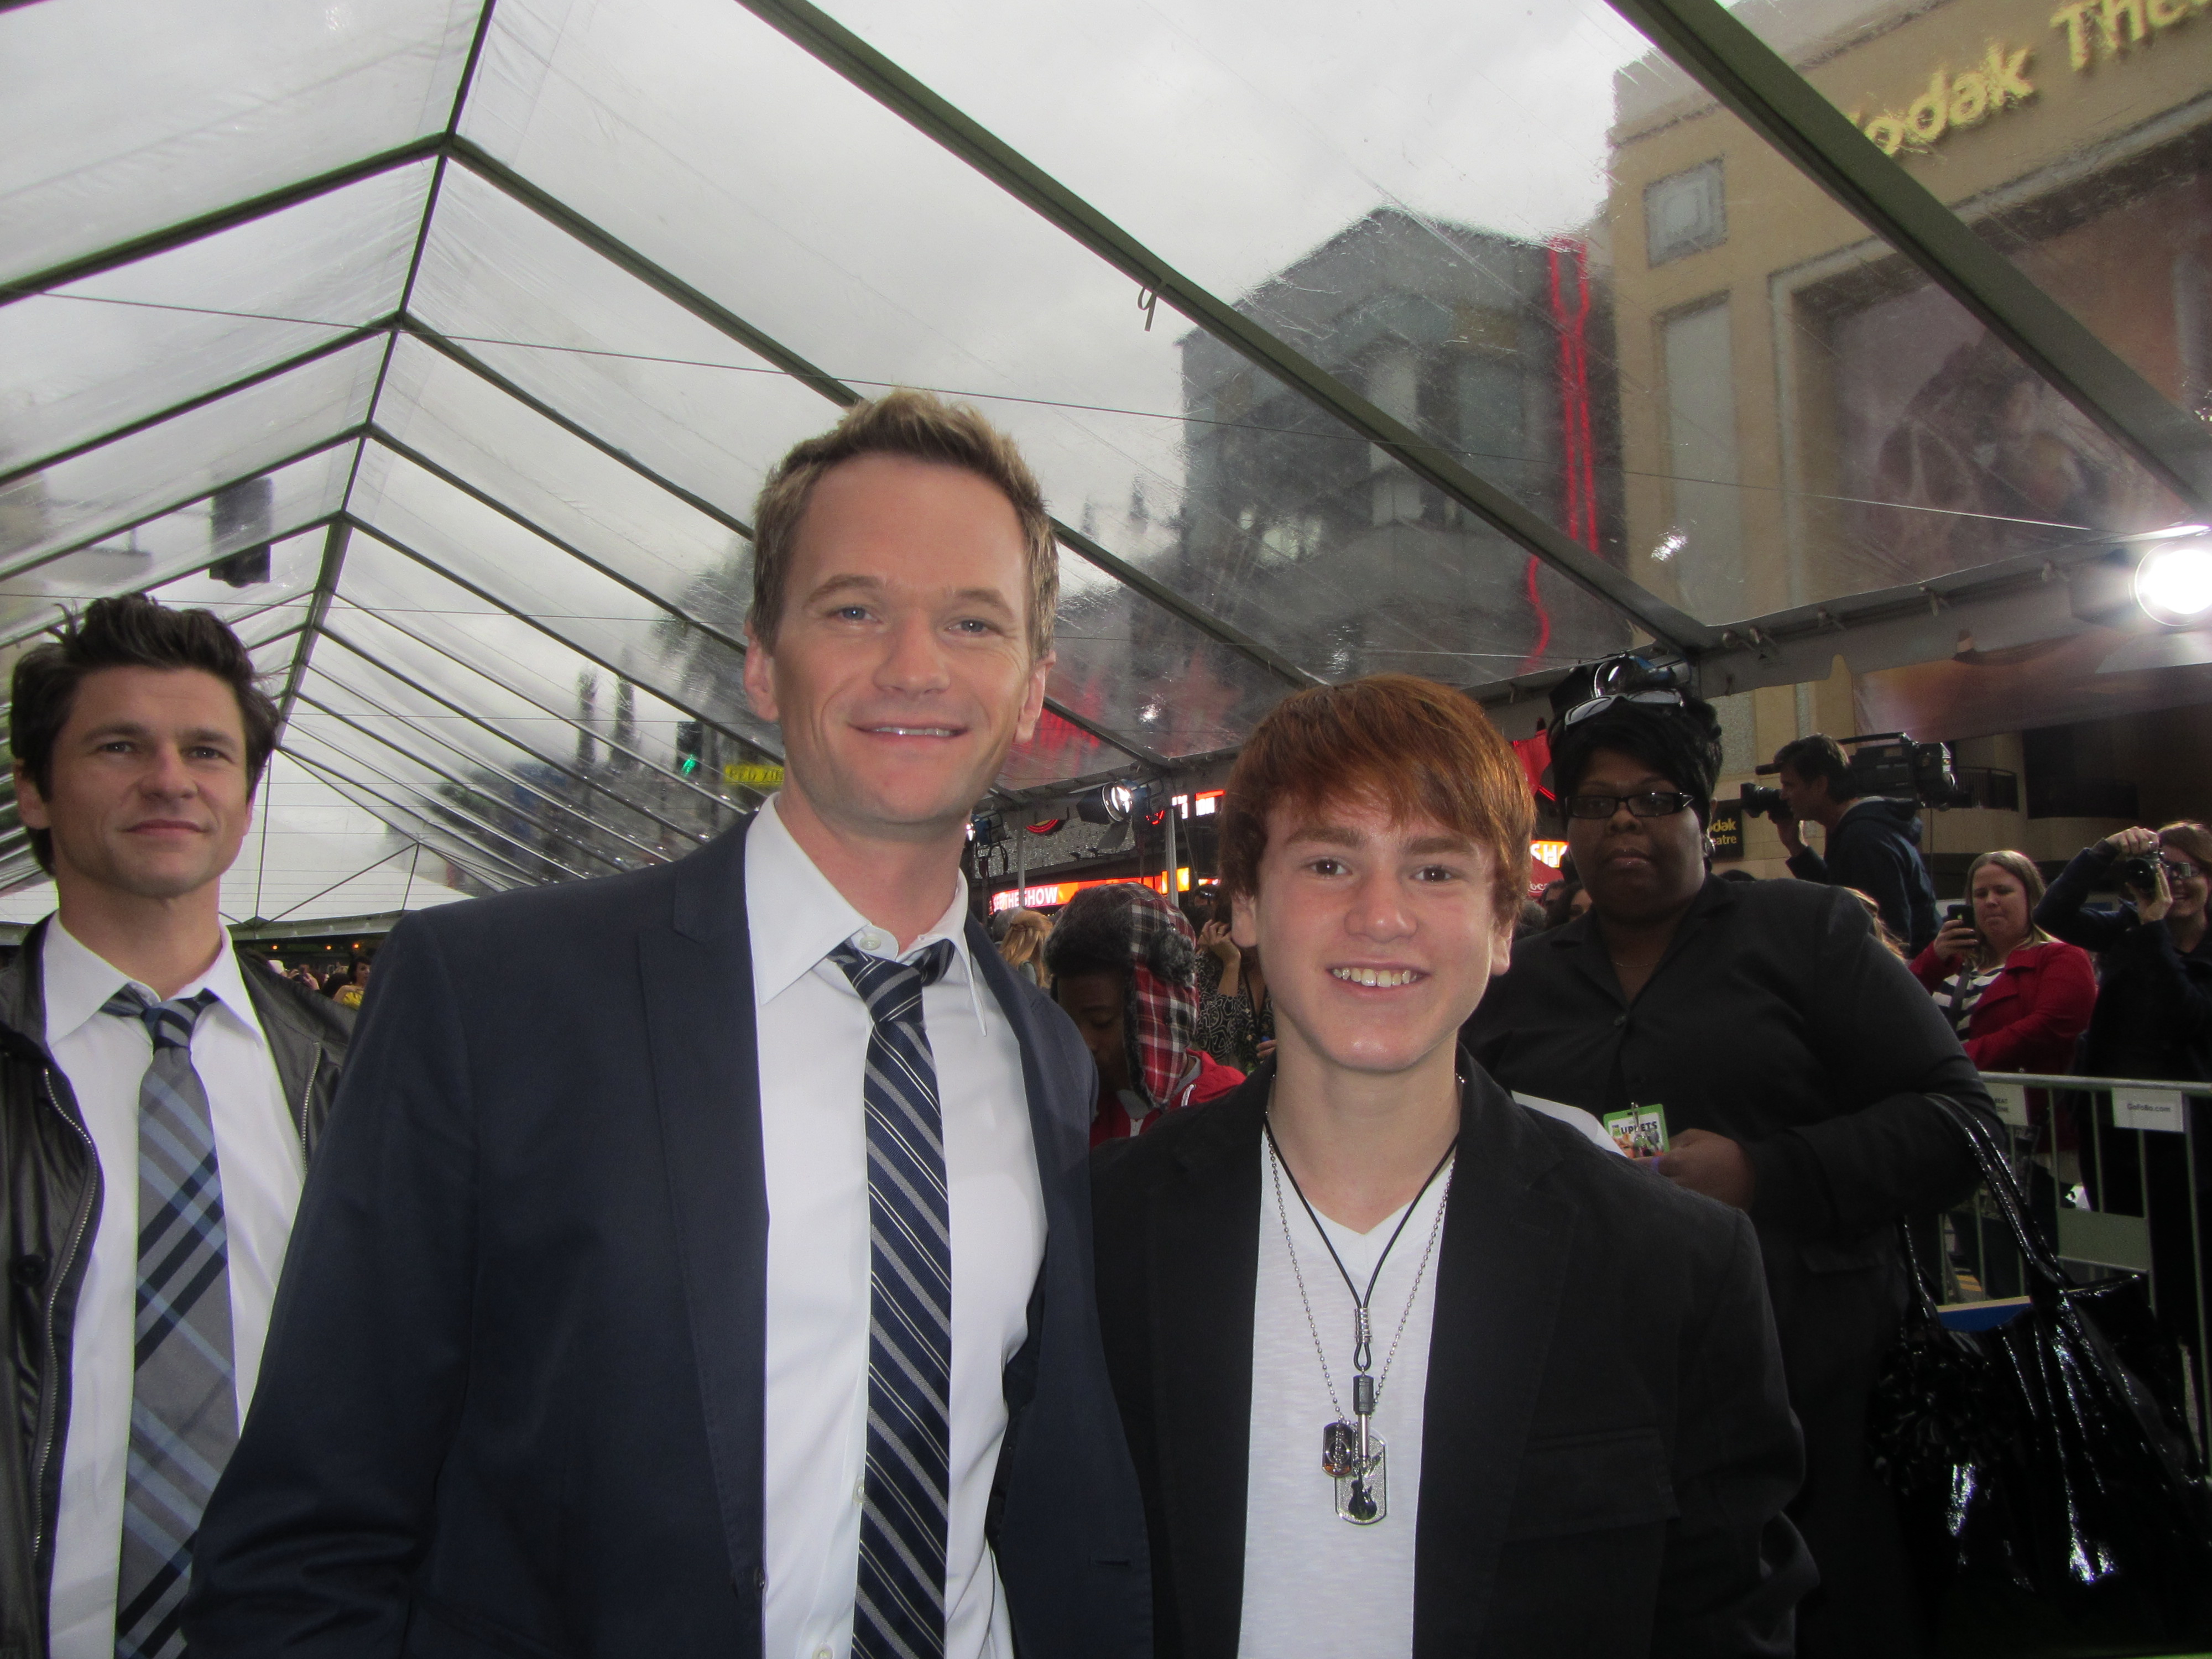 Justin Tinucci with Neil Patrick Harris at the premiere of The Muppets November 12 2011 at the El Capitan Theatre, Hollywood.